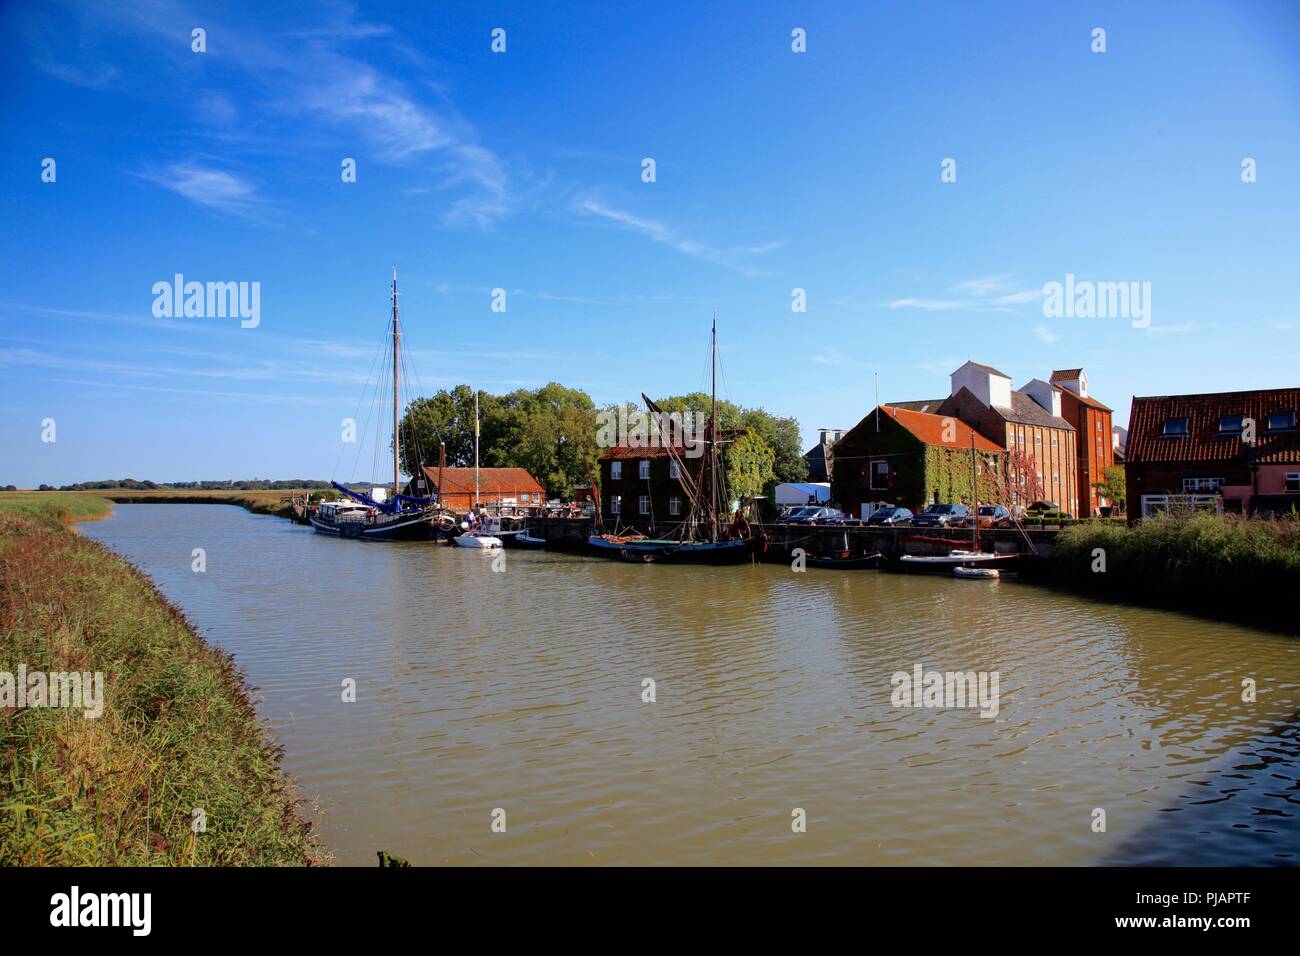 Snape Maltings Suffolk UK Summer 2018 Banque D'Images